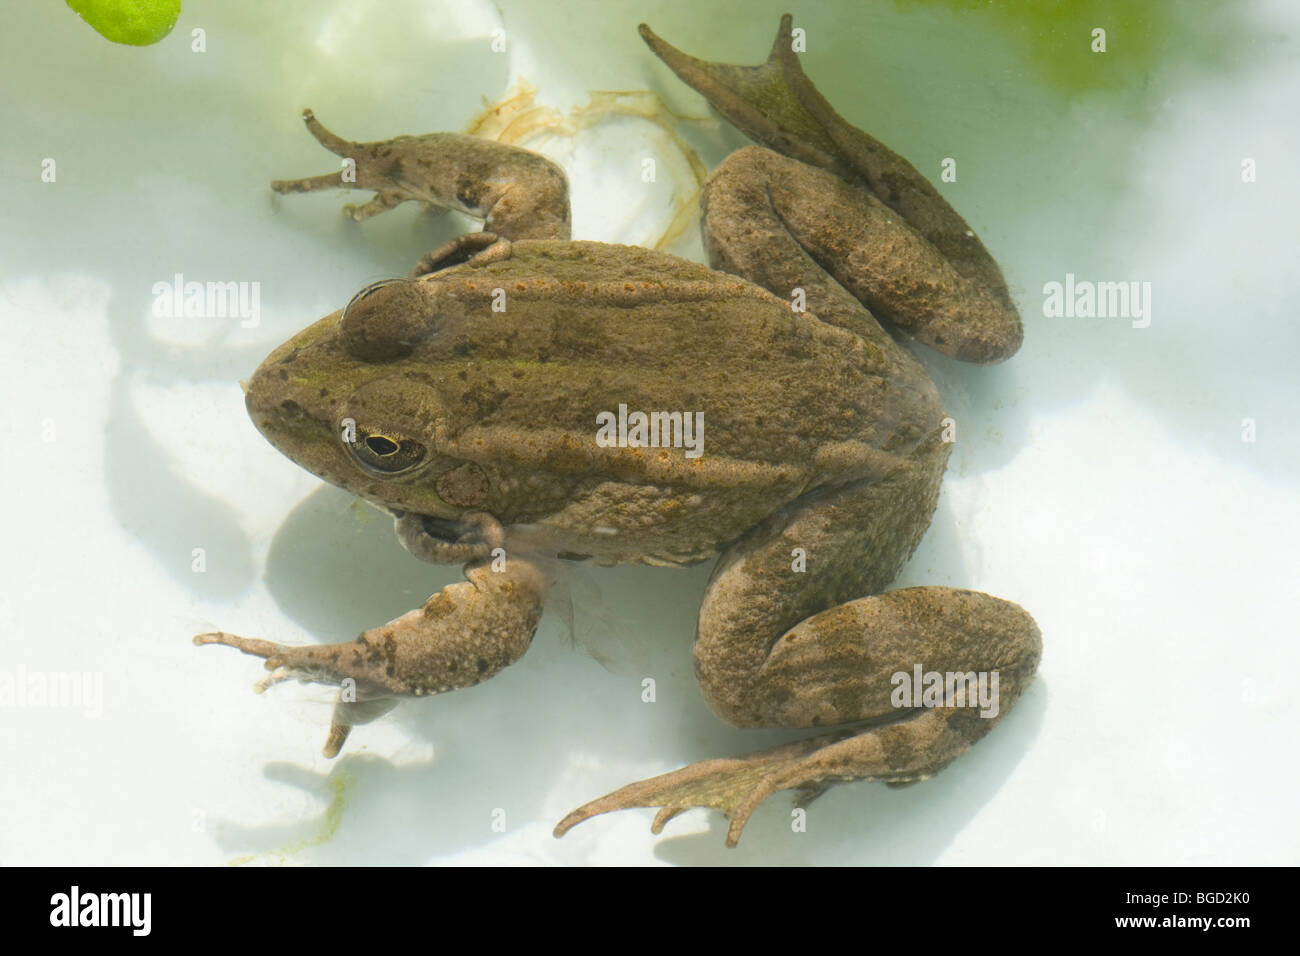 Iberian Water Frog or Southern Marsh Frog (Rana perezi). Iberia and southern France. This specimen northern Spain. Stock Photo